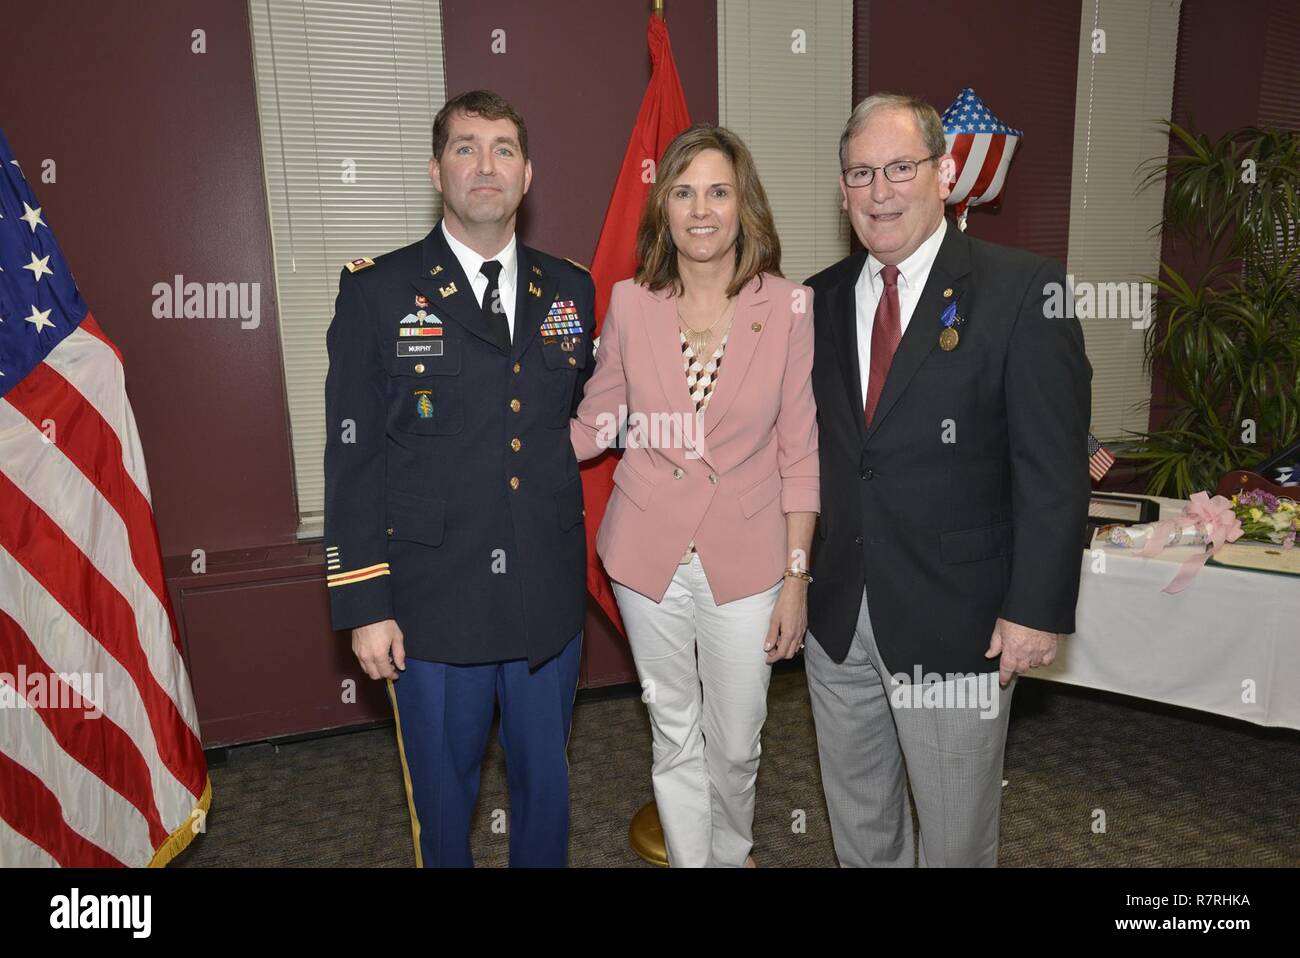 Lt. Col. Stephen Murphy, U.S. Army Corps of Engineers Nashville District commander, thanks Cady Wilson for supporting her husband Mike Wilson, Nashville District deputy district engineer for Project Management, during his retirement ceremony at the district headquarters in Nashville, Tenn., March 31, 2017. (USACE Stock Photo